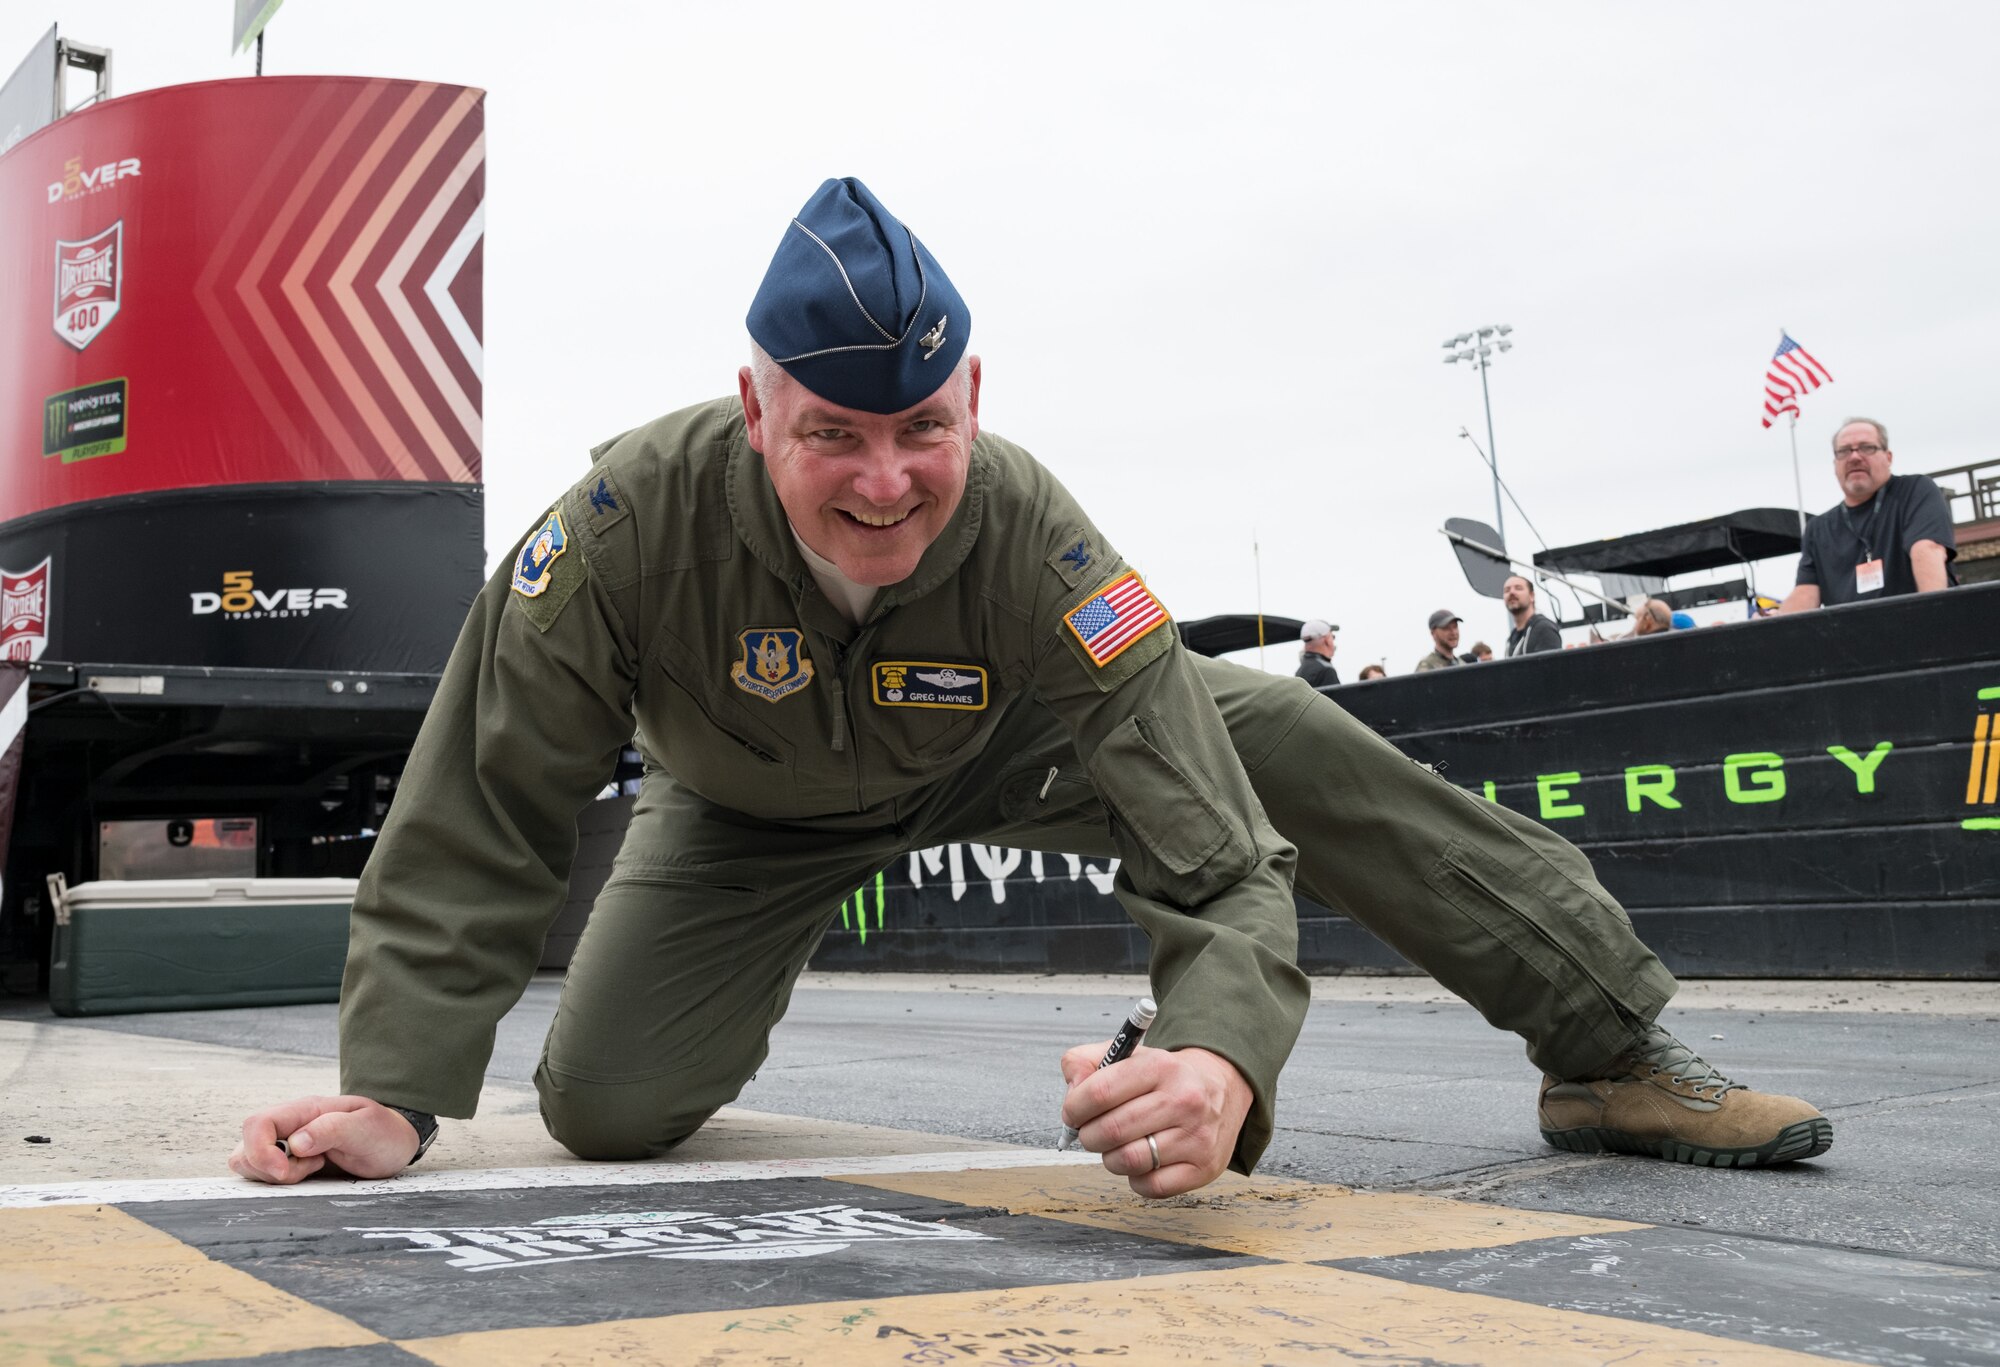 Col. Gregory Haynes, 512th Airlift Wing commander, writes on the racetrack start/finish line Oct. 6, 2019, at Dover International Speedway, Dover, Del. Haynes took the opportunity to write a message on the checkered line prior to the start of the “Drydene 400” Monster Energy NASCAR Cup Series playoff race. (U.S. Air Force photo by Roland Balik)